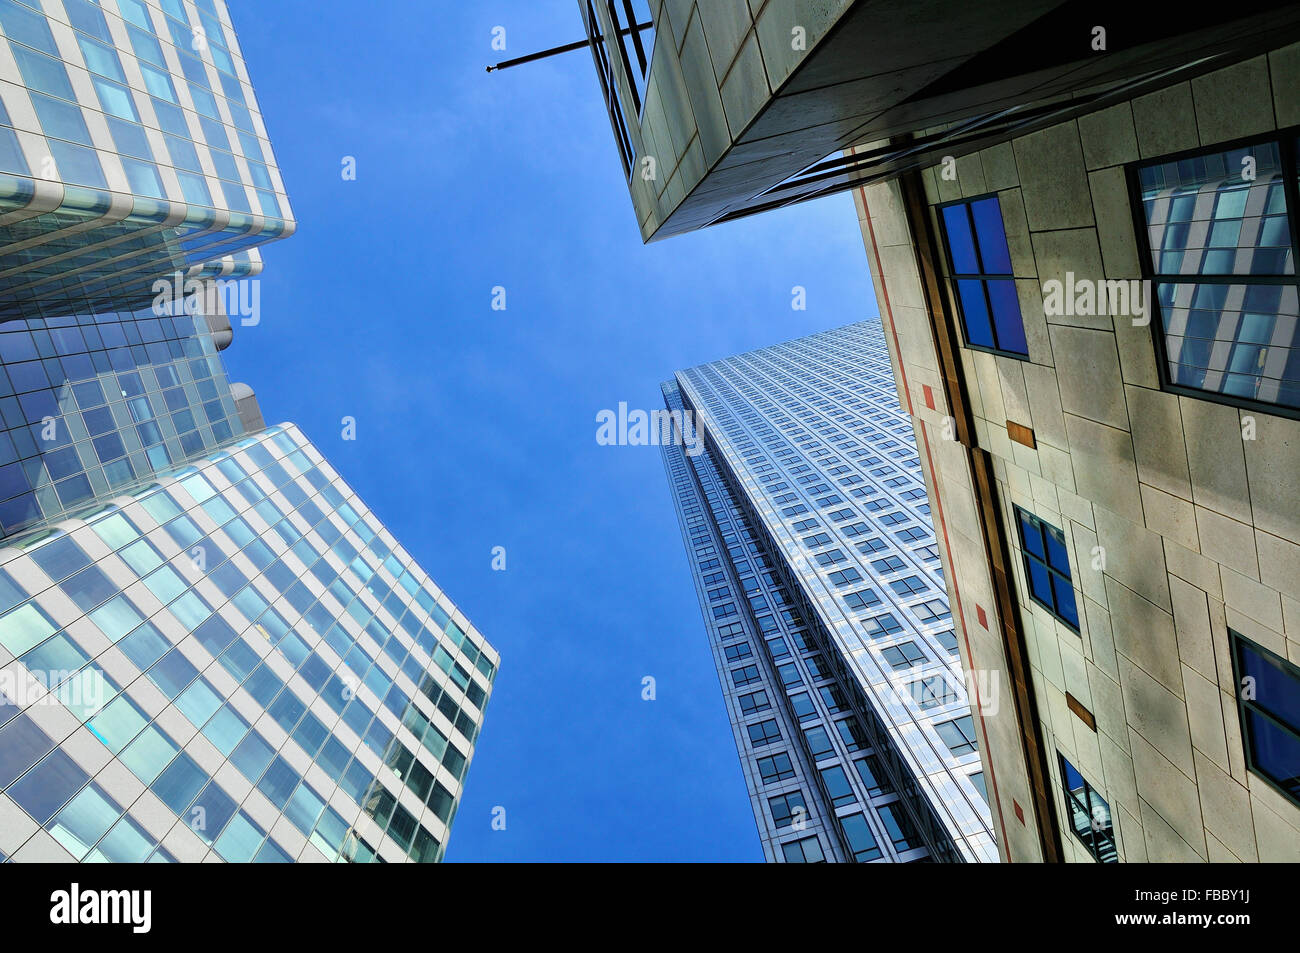 Skyscrapers at Canary Wharf, London, with blue sky Stock Photo